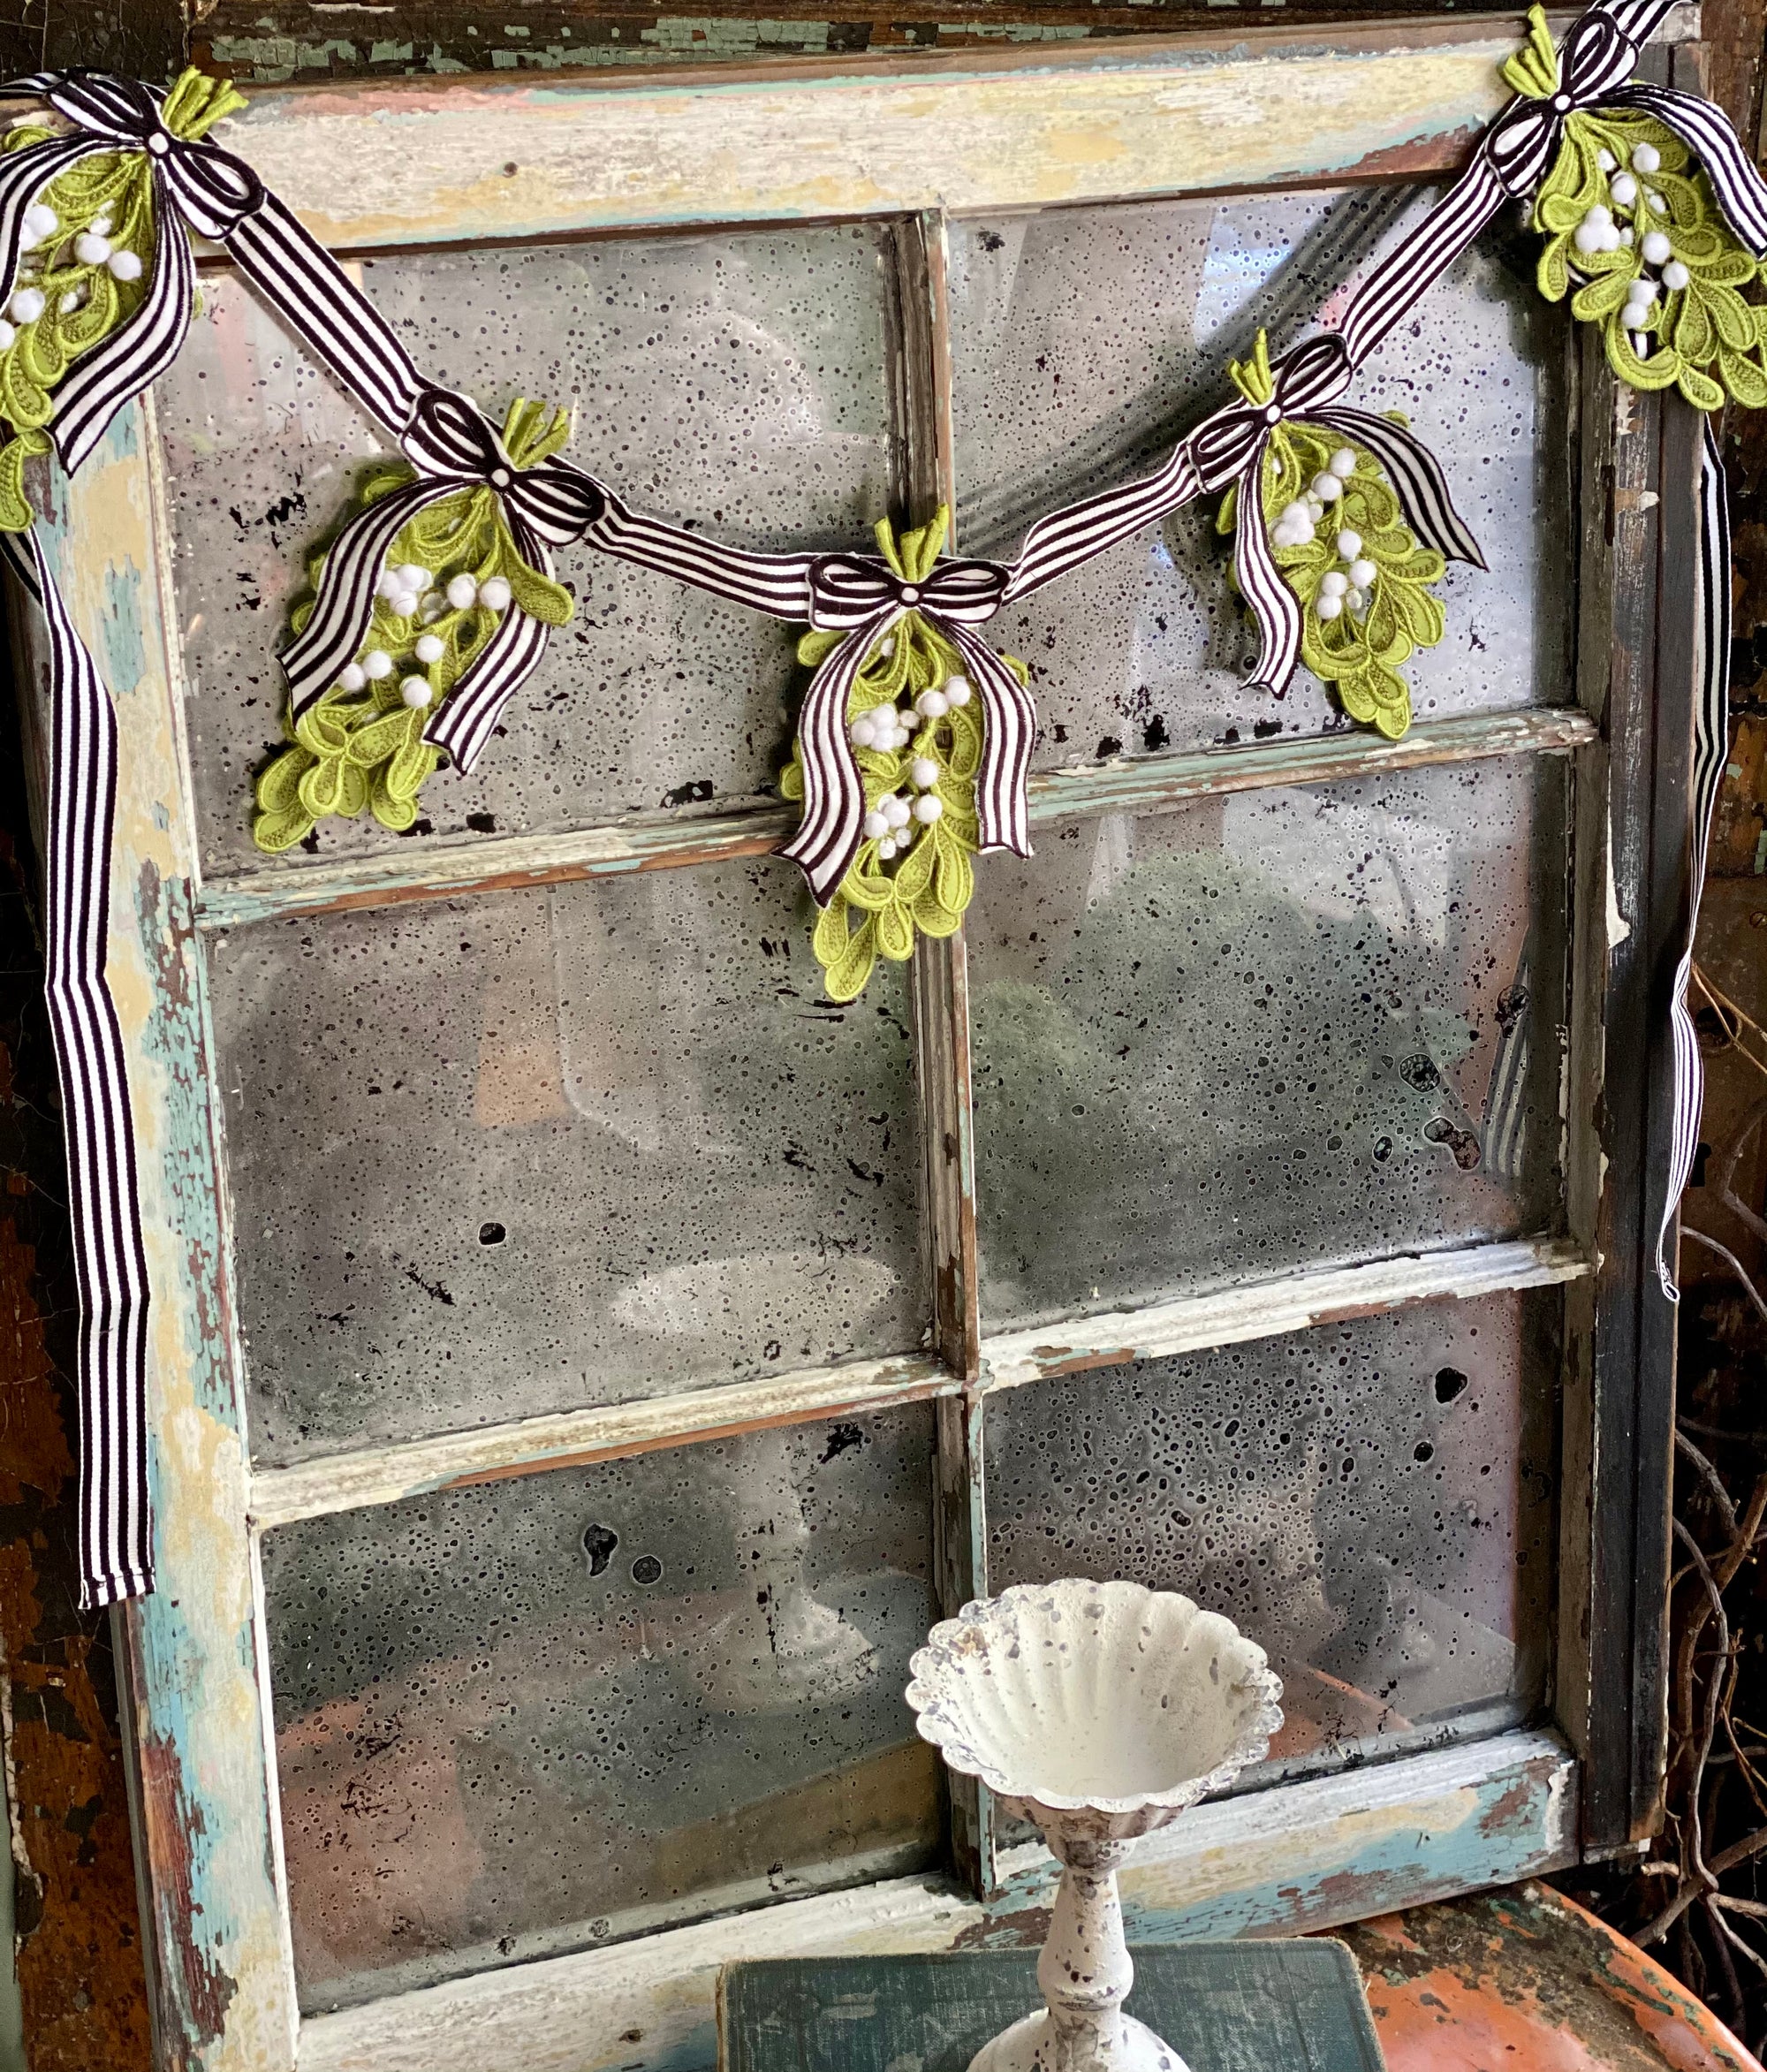 Upcycle An Old Window Into An Antiqued Mirror ~ The Easy Way!